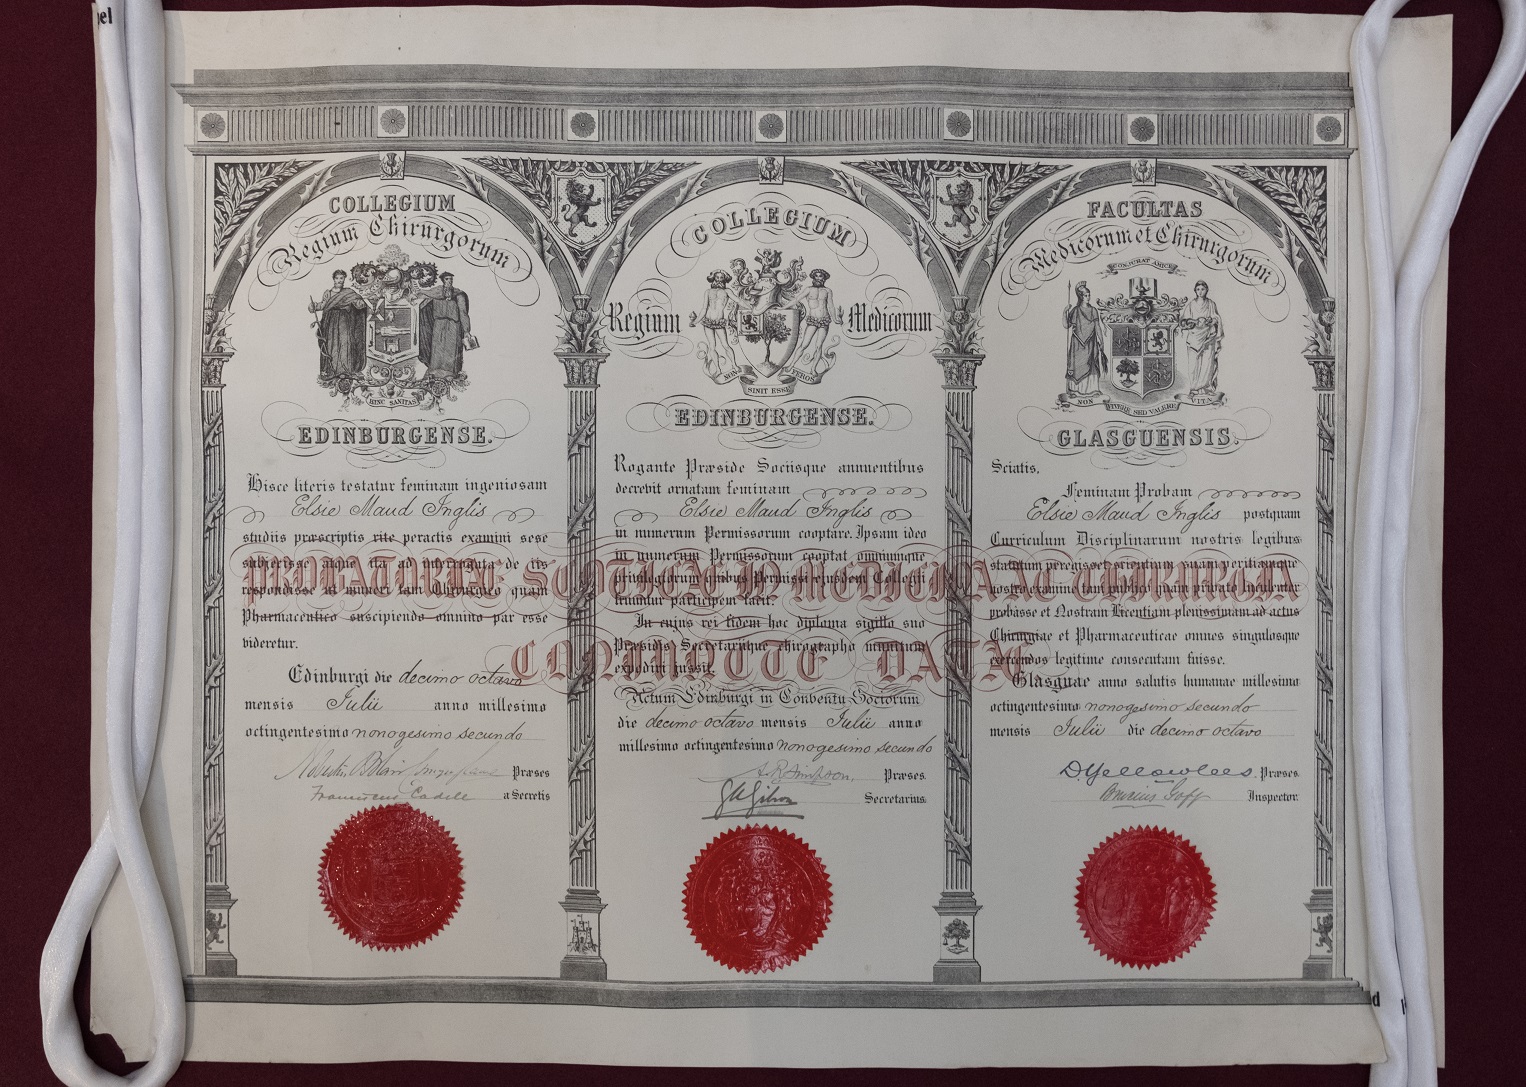 Image of a Triple Qualification certificate